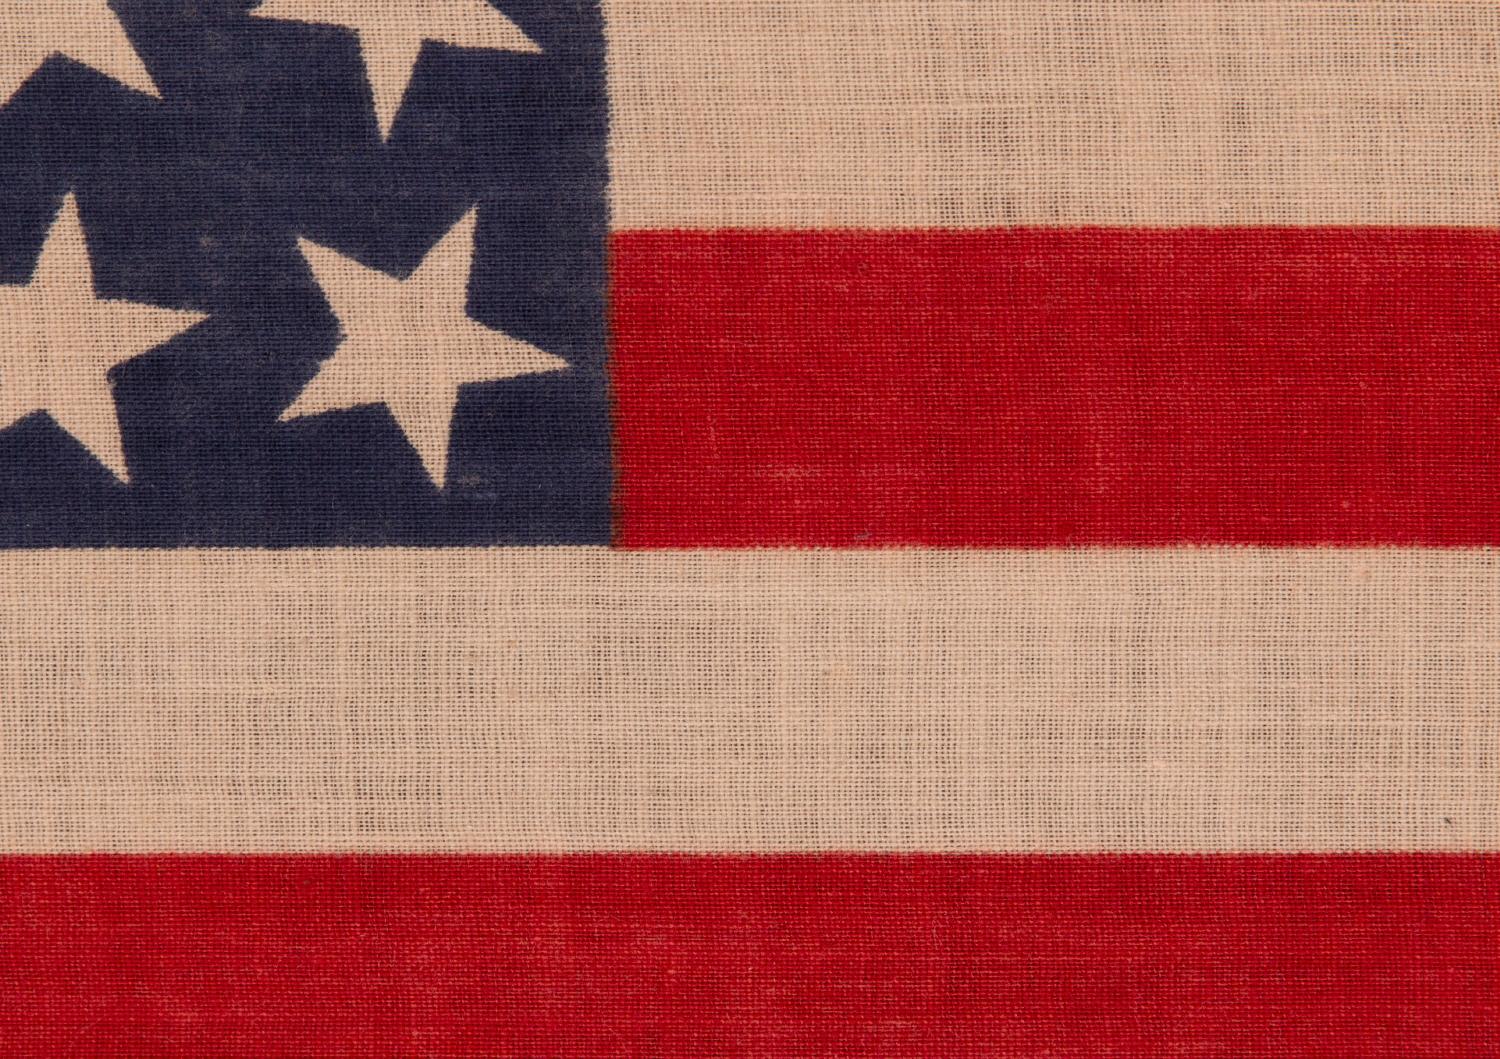 Late 19th Century 42 Stars, an Unofficial Star Count on an Antique American Flag, Scattered Stars